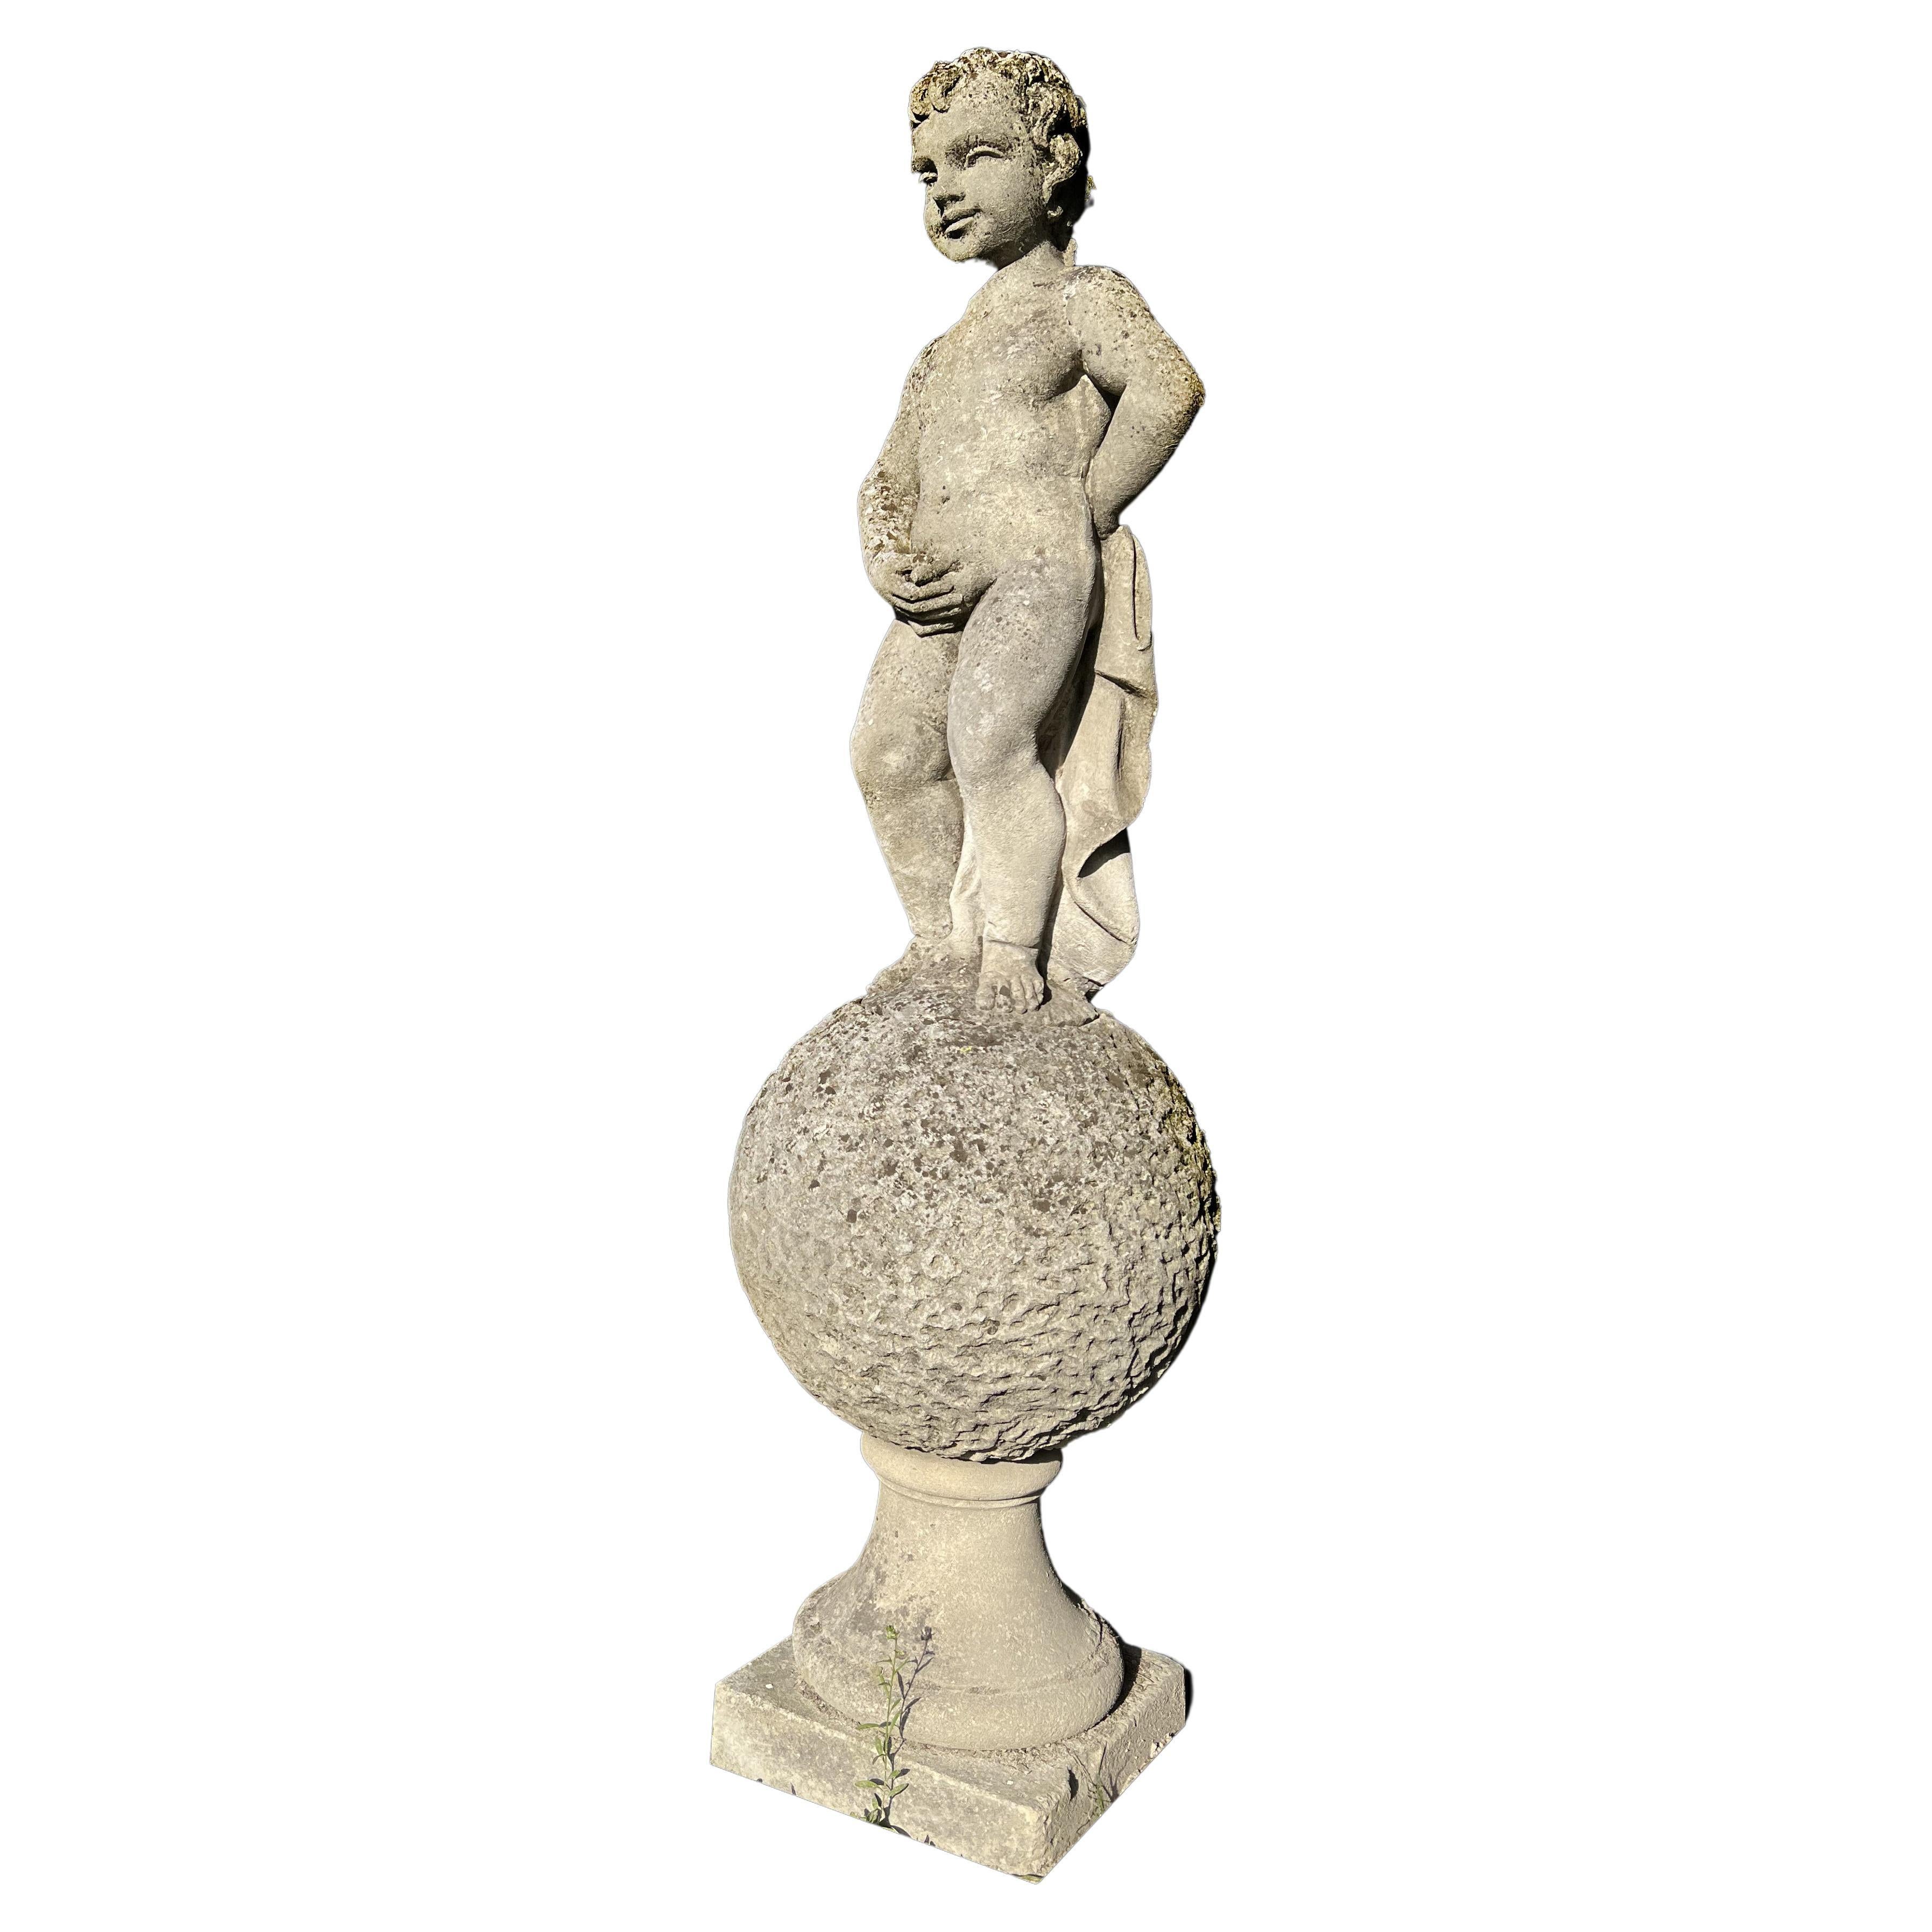 Puer Mingens, Charming Garden Sculpture in Vicenza Stone, 1960 For Sale